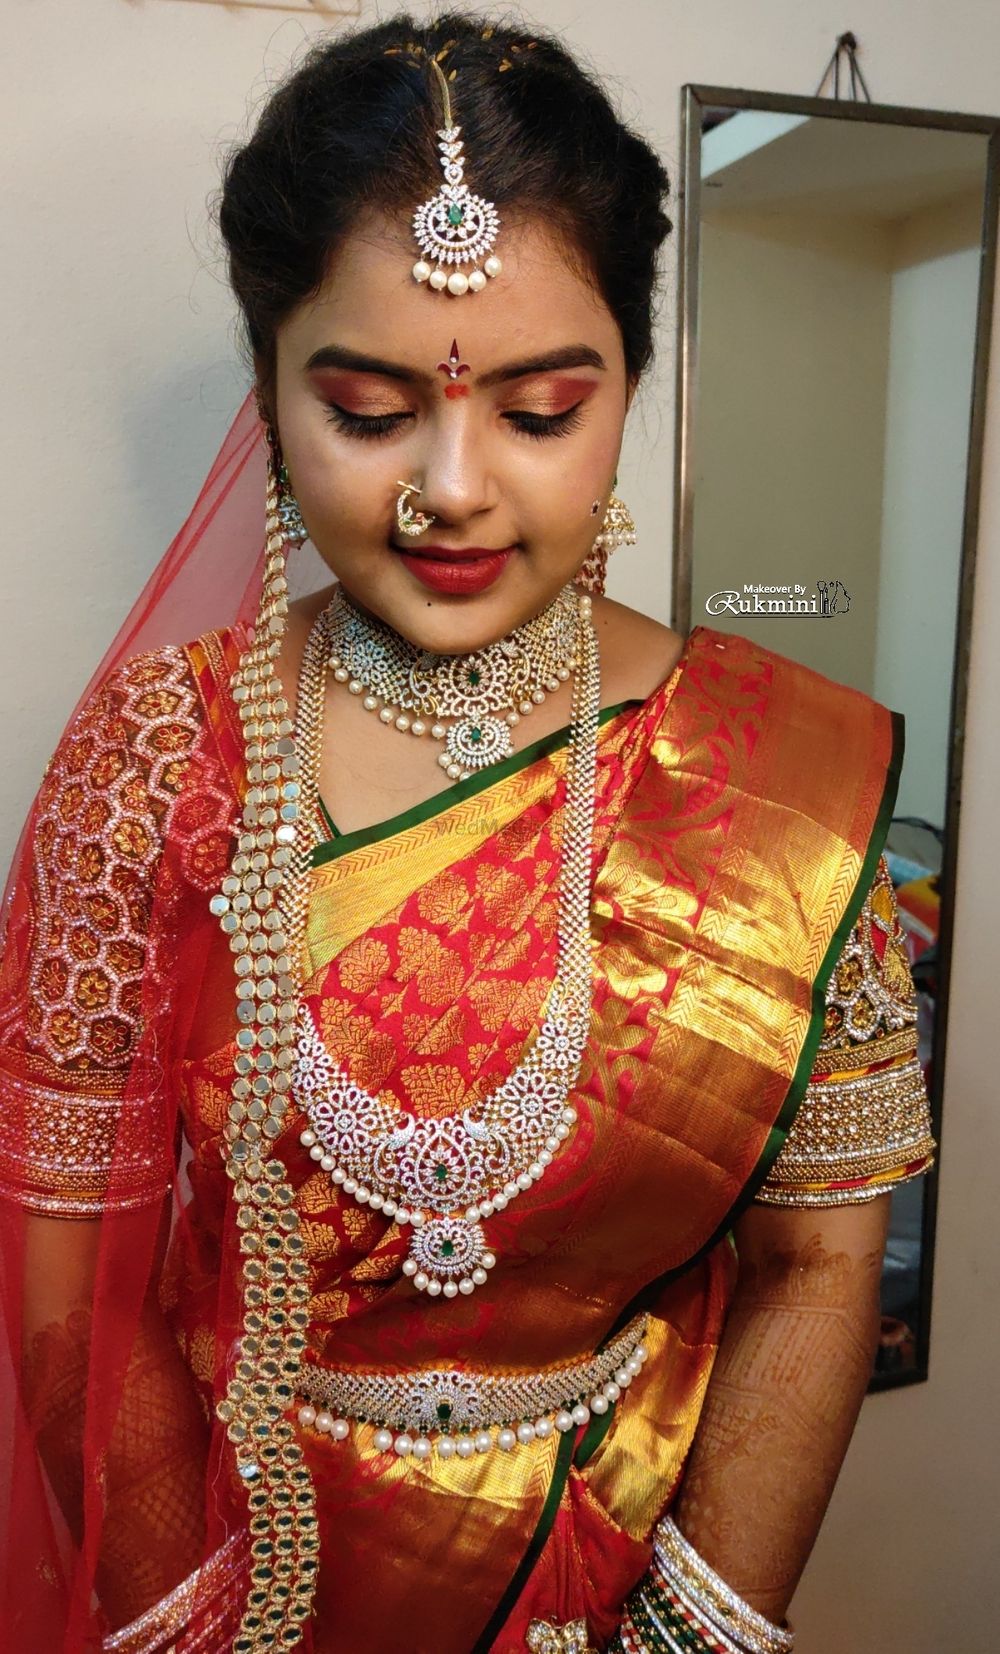 Photo From Wedding - By Makeover by Rukmini Kiran